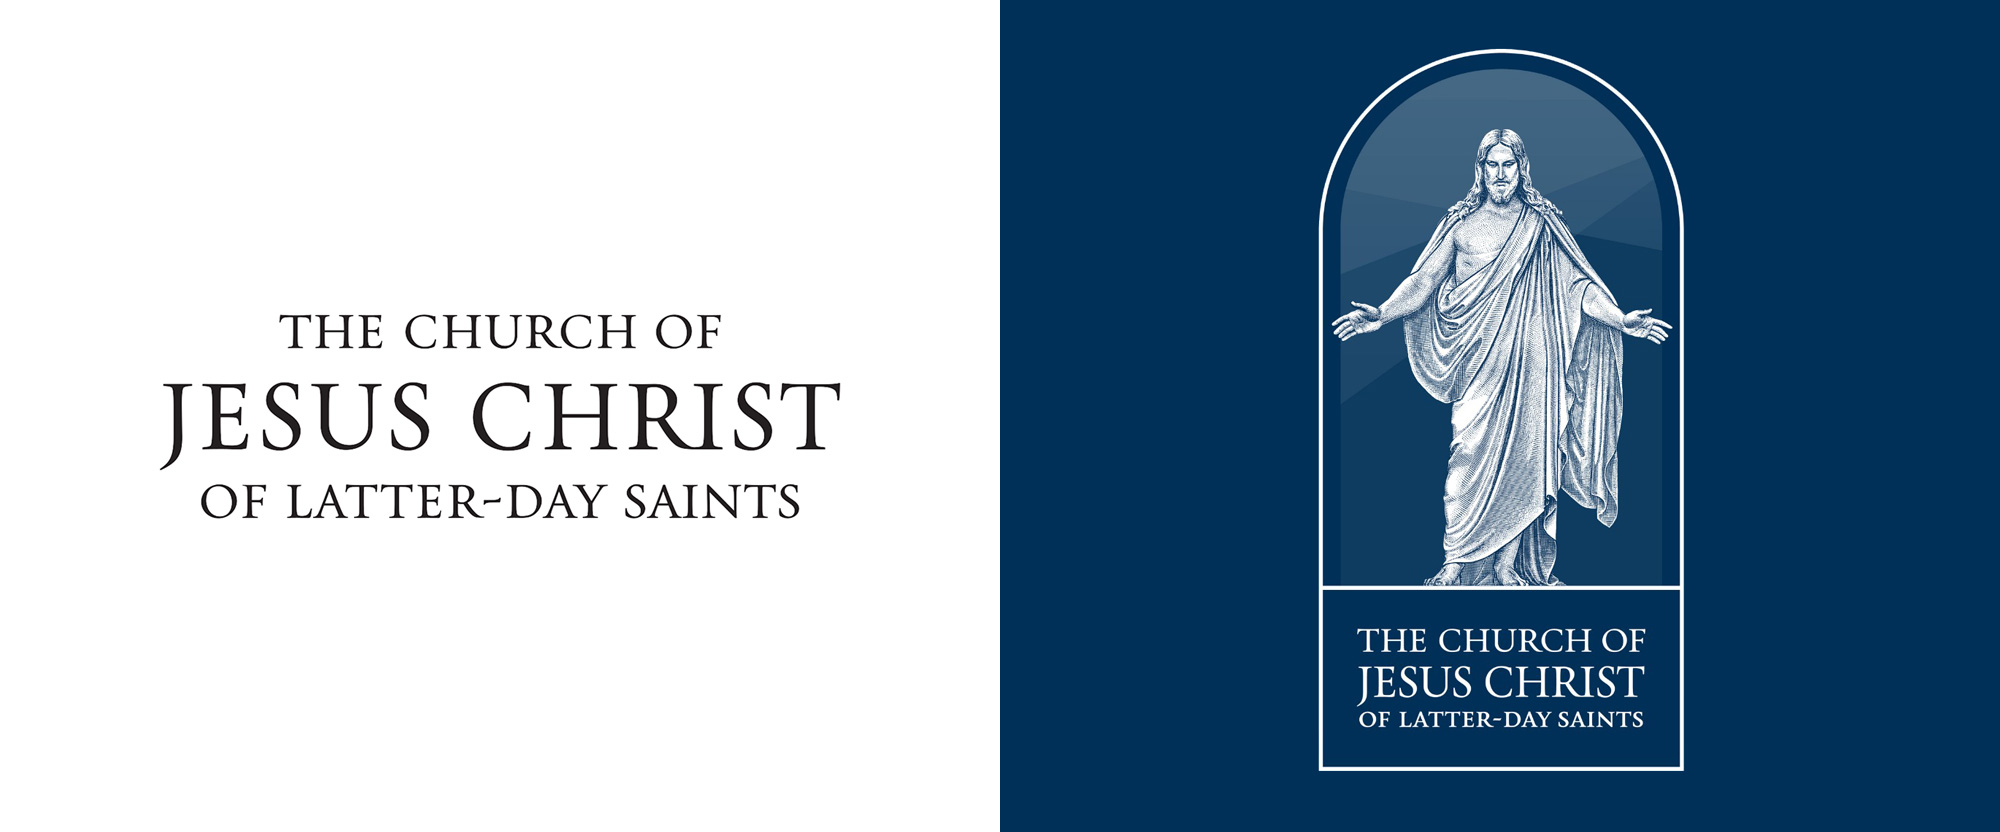 noted-new-logo-for-the-church-of-jesus-christ-of-latter-day-saints